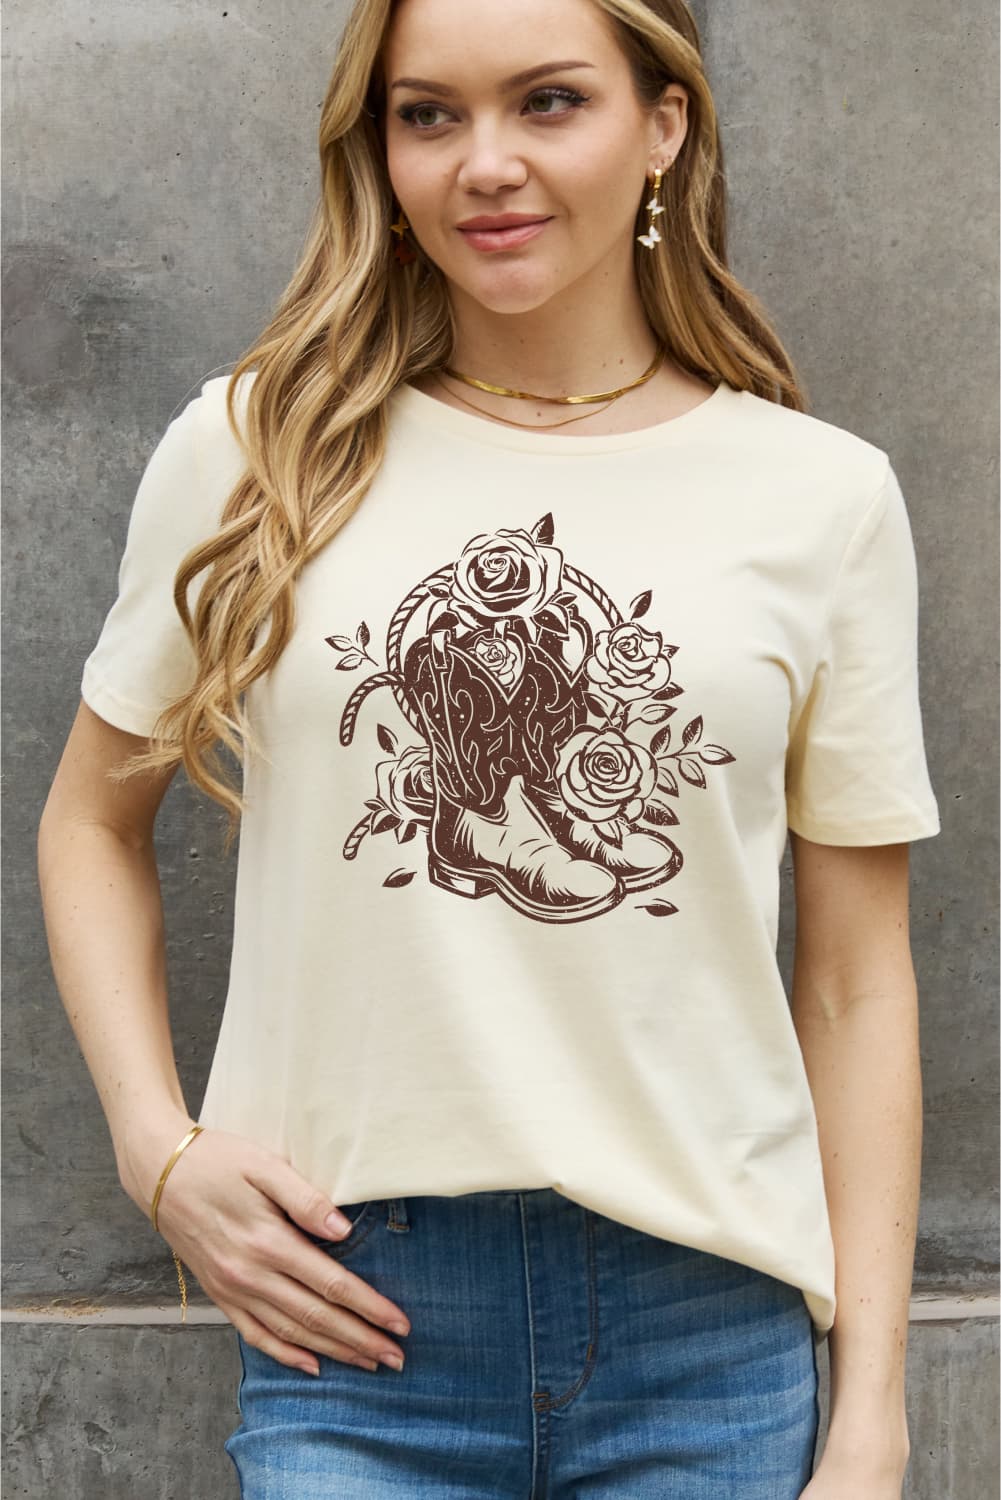 Simply Love Full Size Cowboy Boots Flower Graphic Cotton Tee